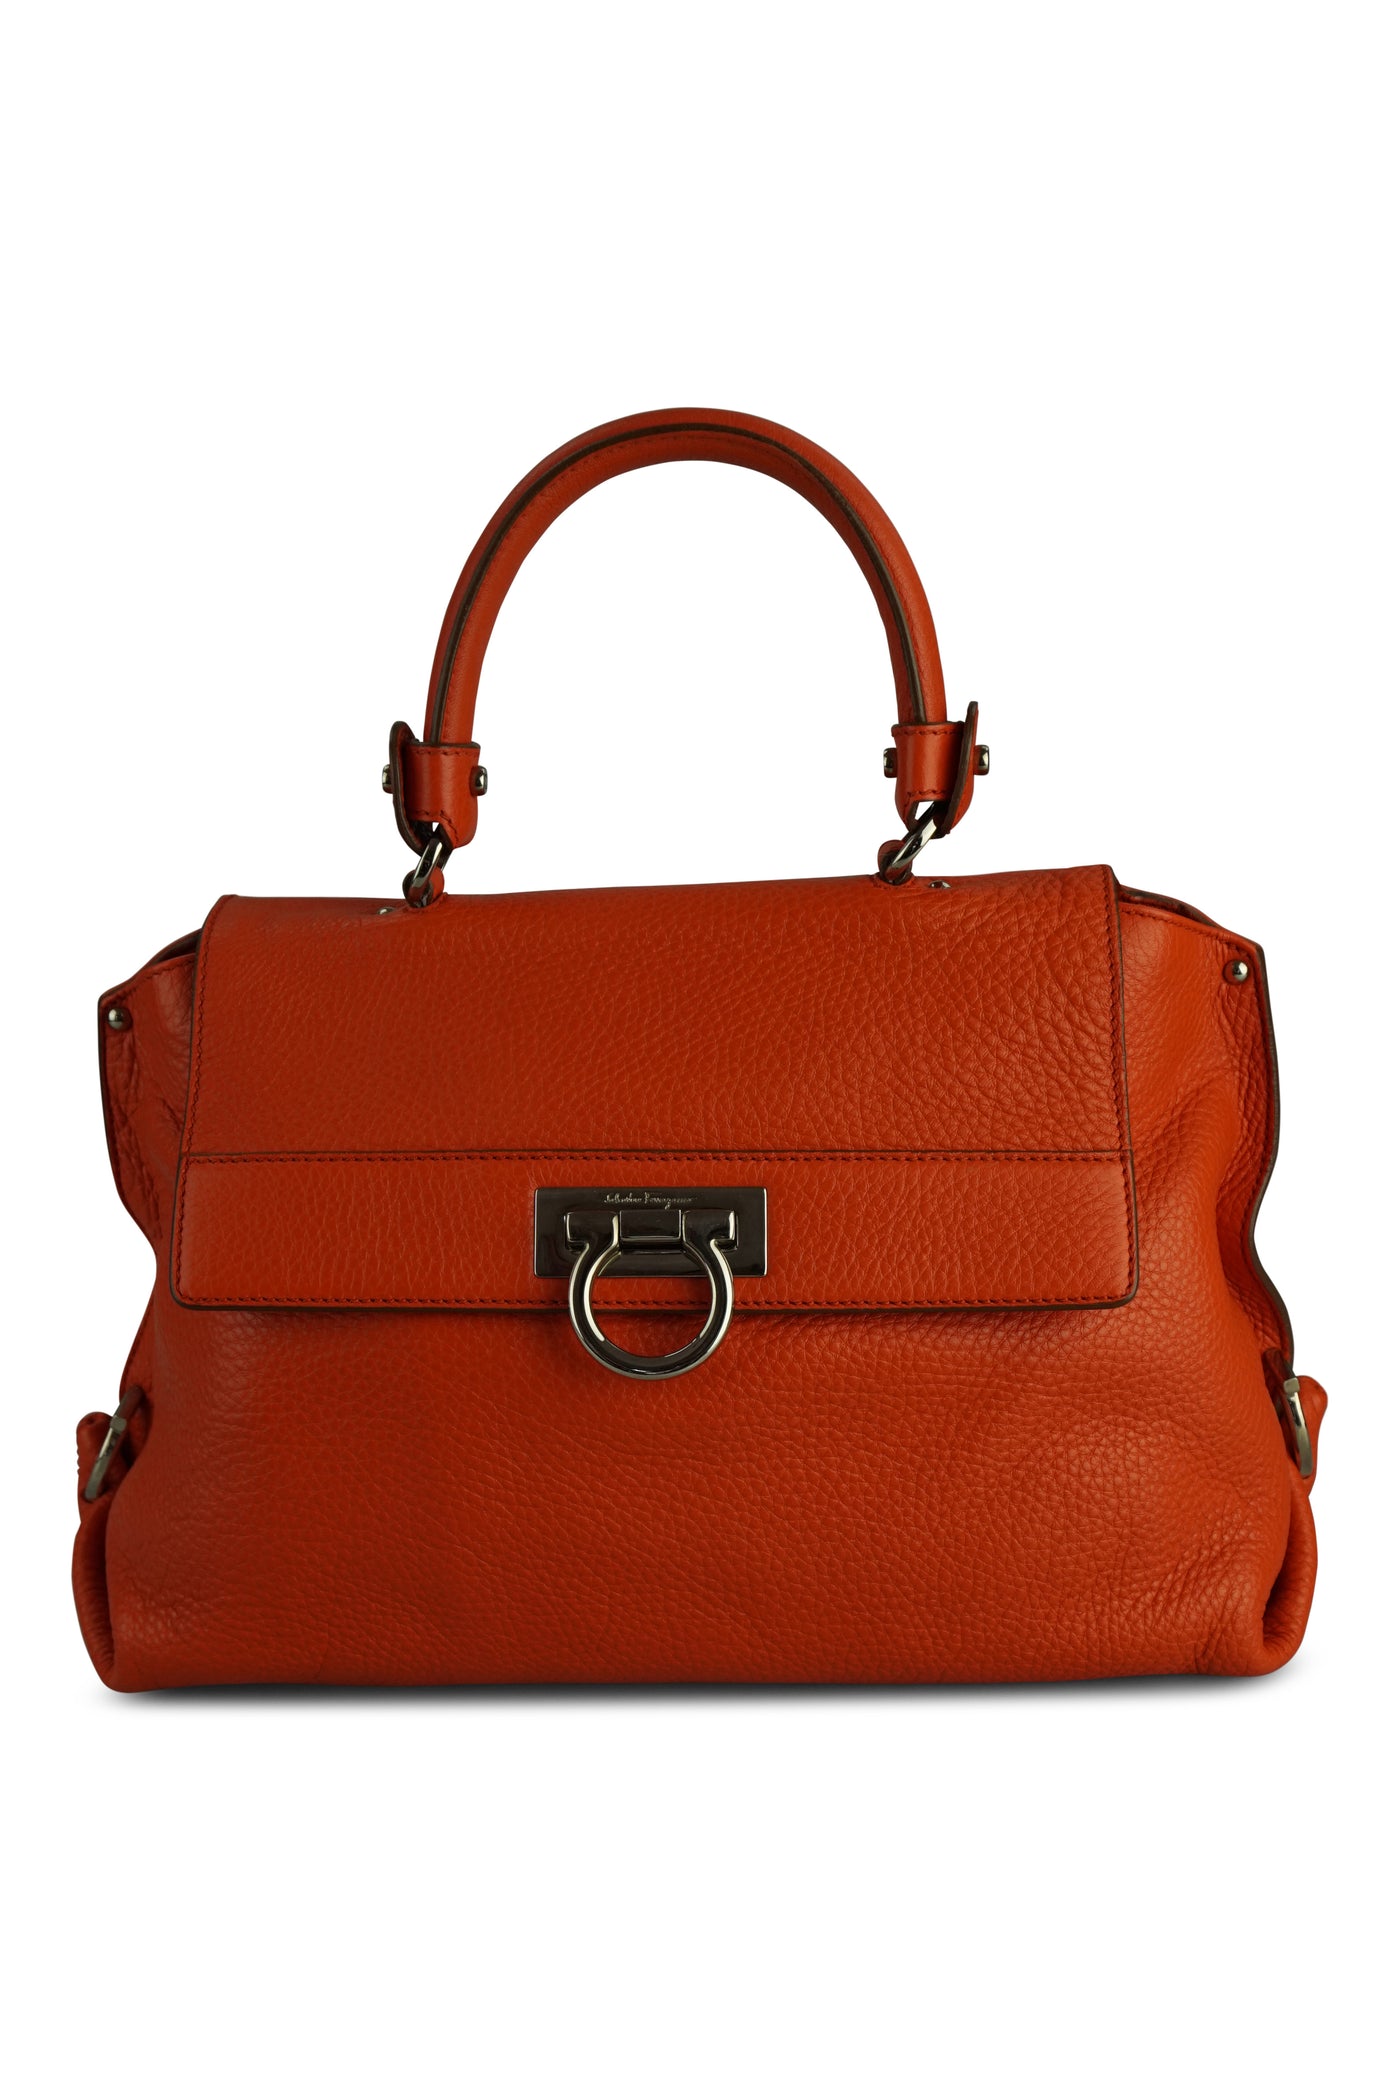 Sofia Clementine Grained Leather Bag